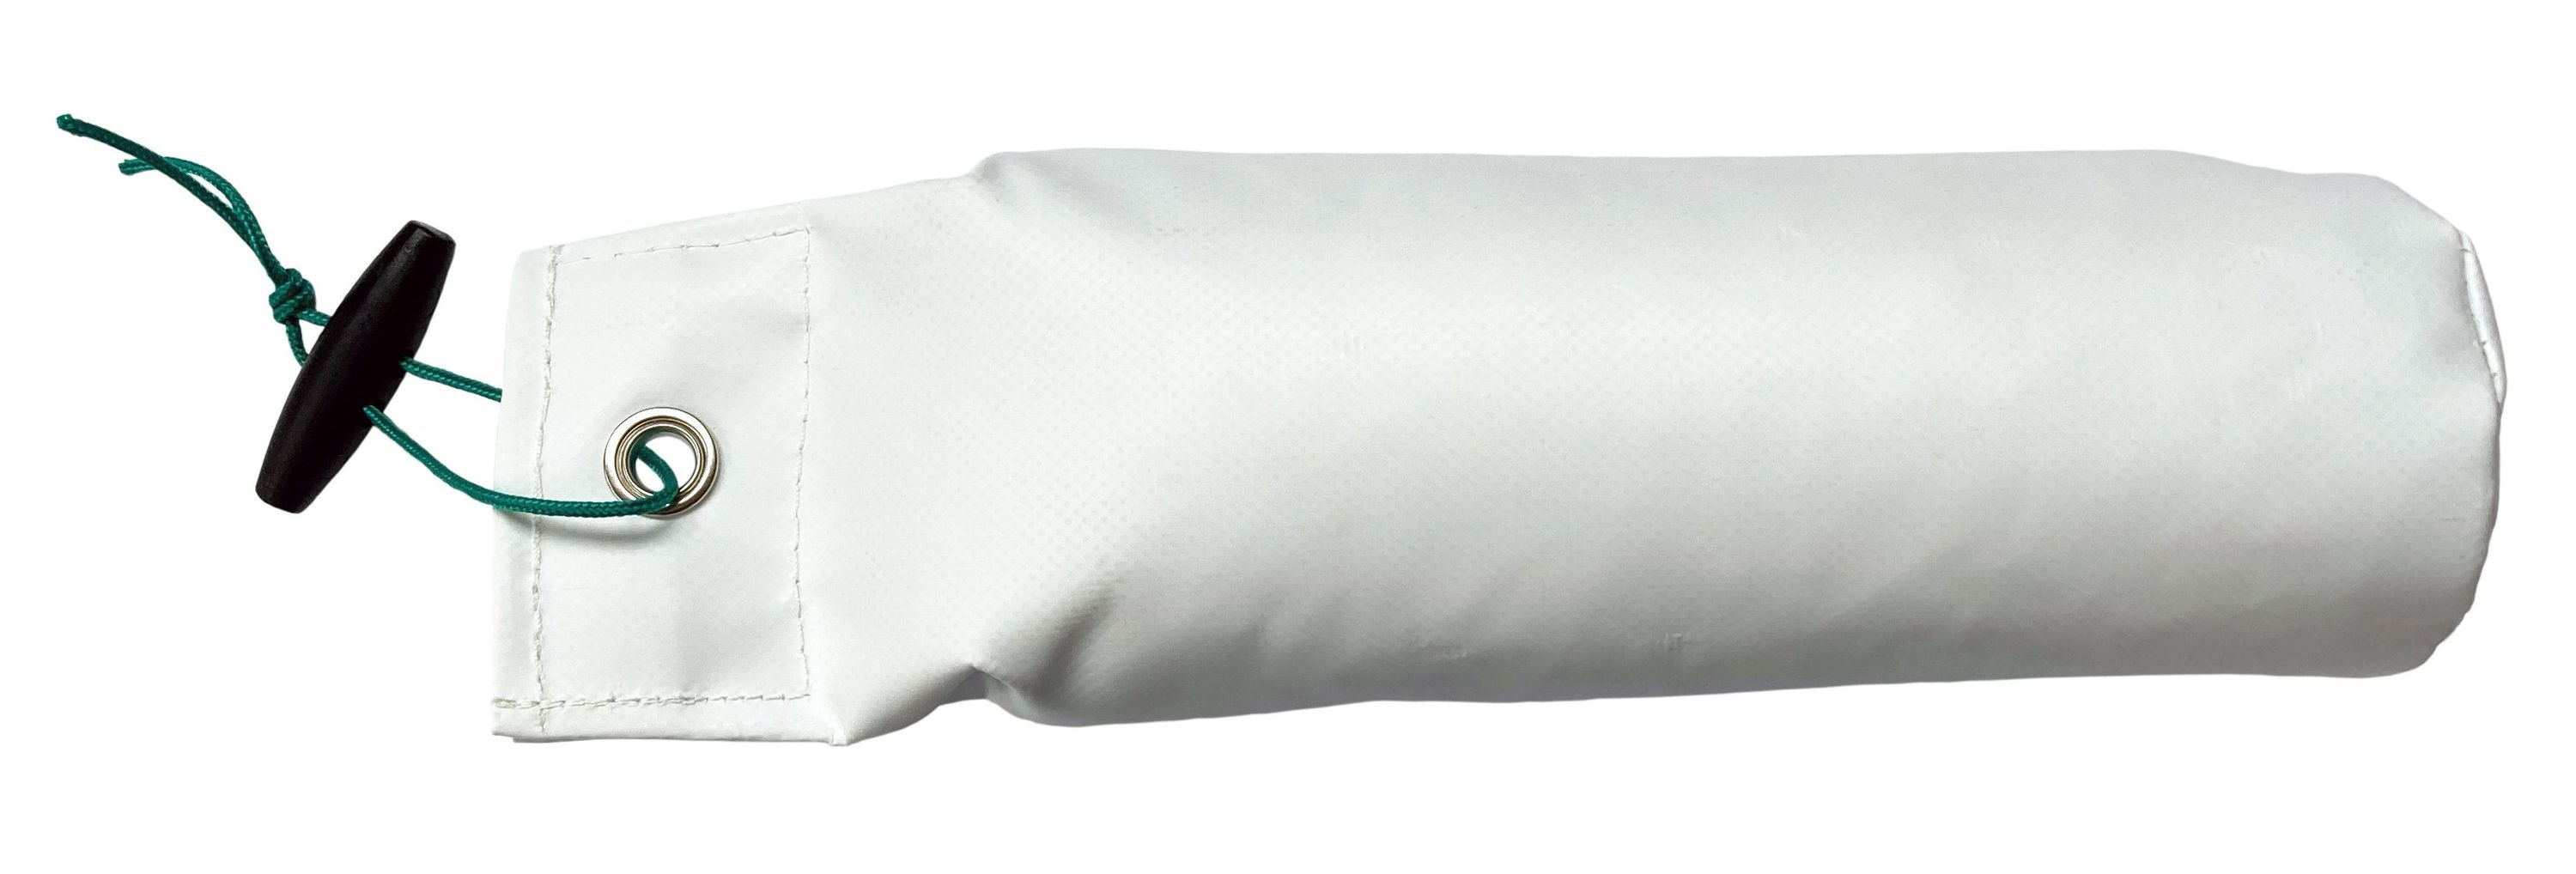 1lb Dummy with Toggle - Wipe Clean PVC - White